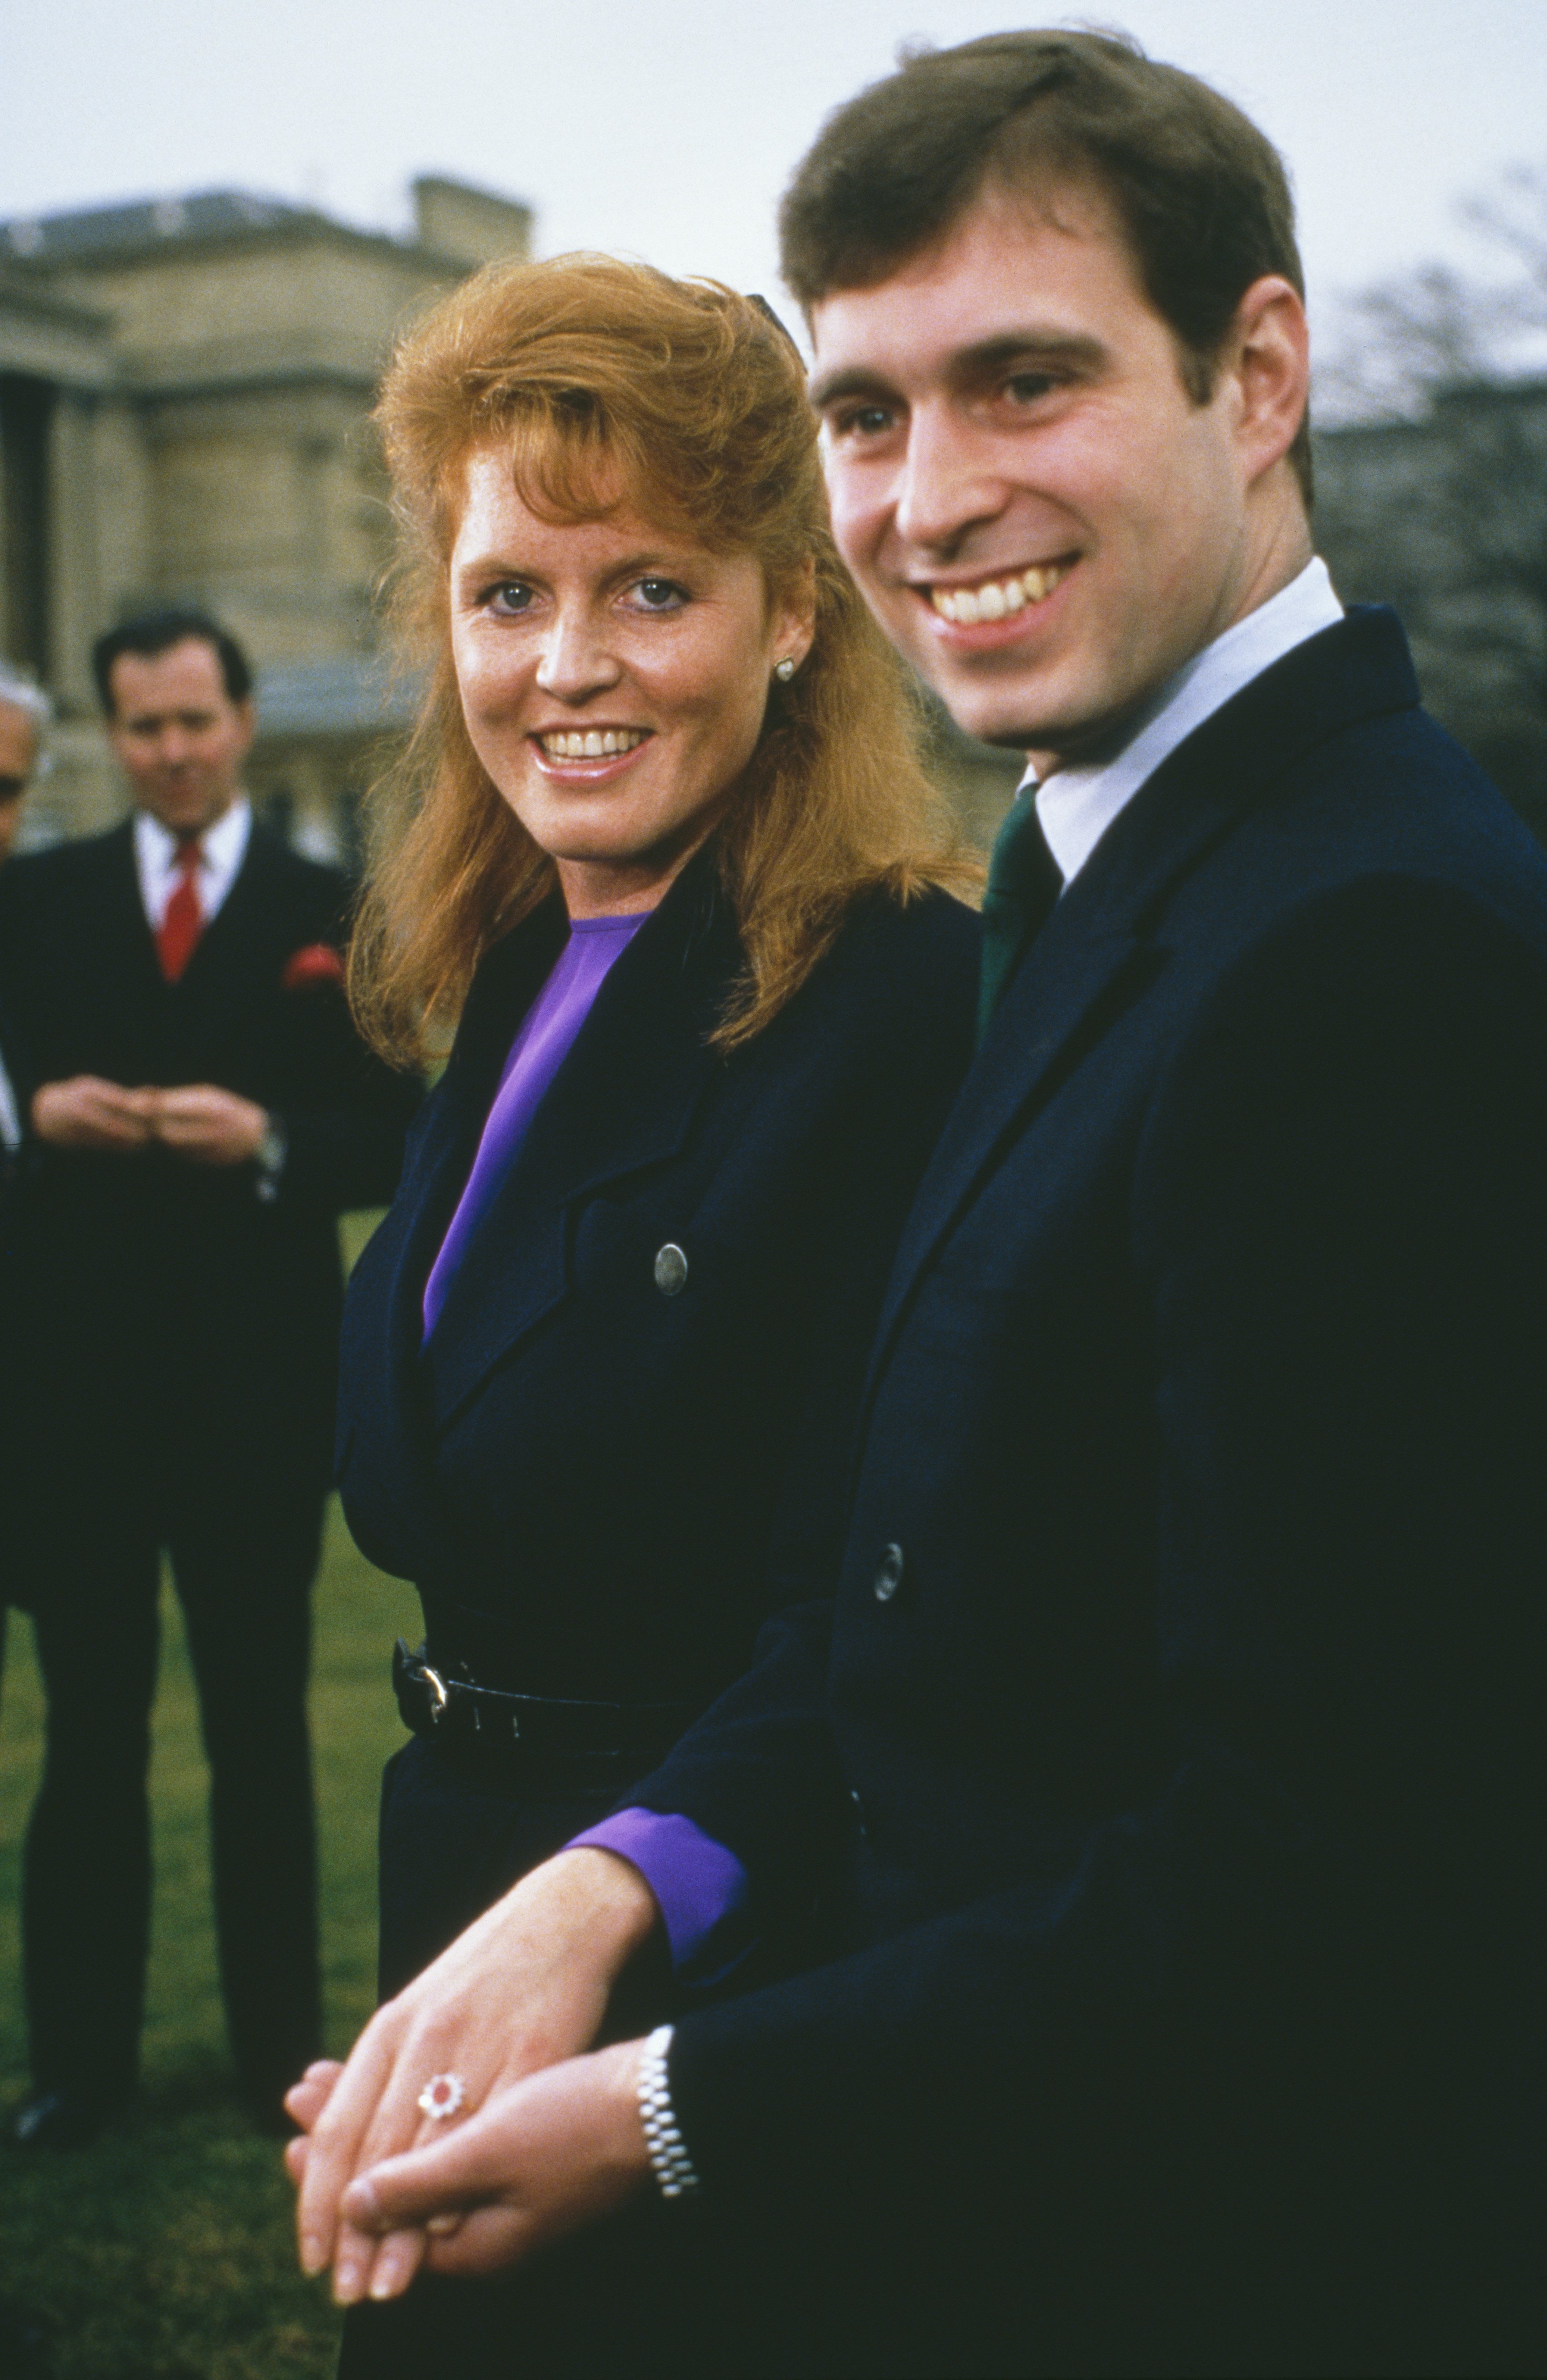 Prince Andrew with Sarah Ferguson at Buckingham Palace after the announcement of their engagement in London on March 17, 1986 | Photo: Getty Images